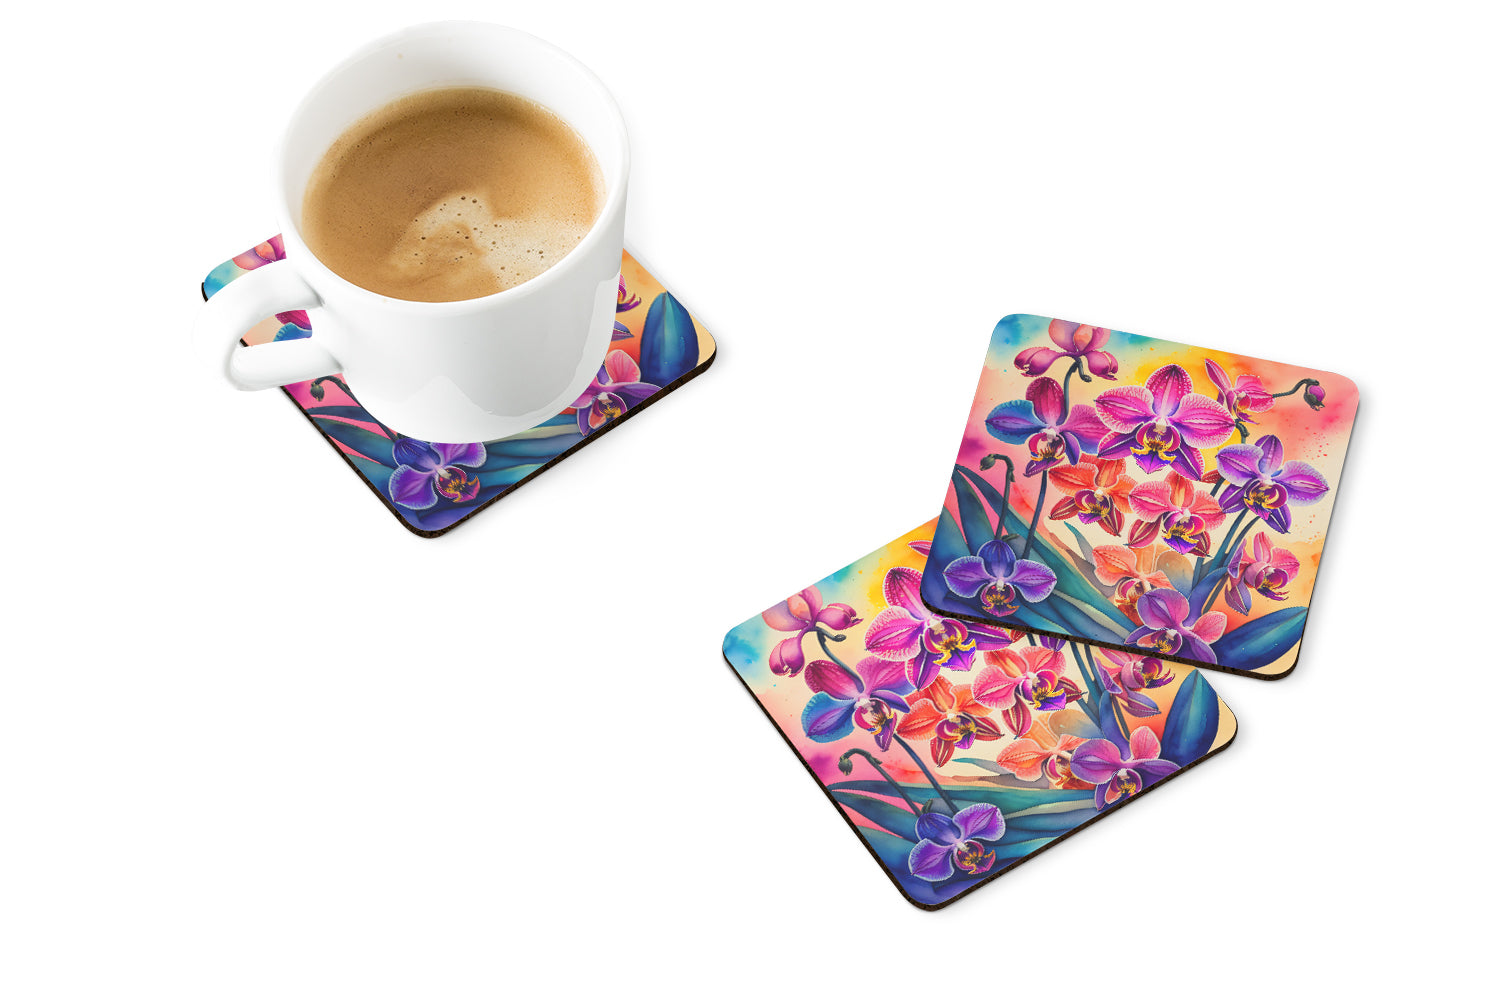 Colorful Orchids Foam Coaster Set of 4